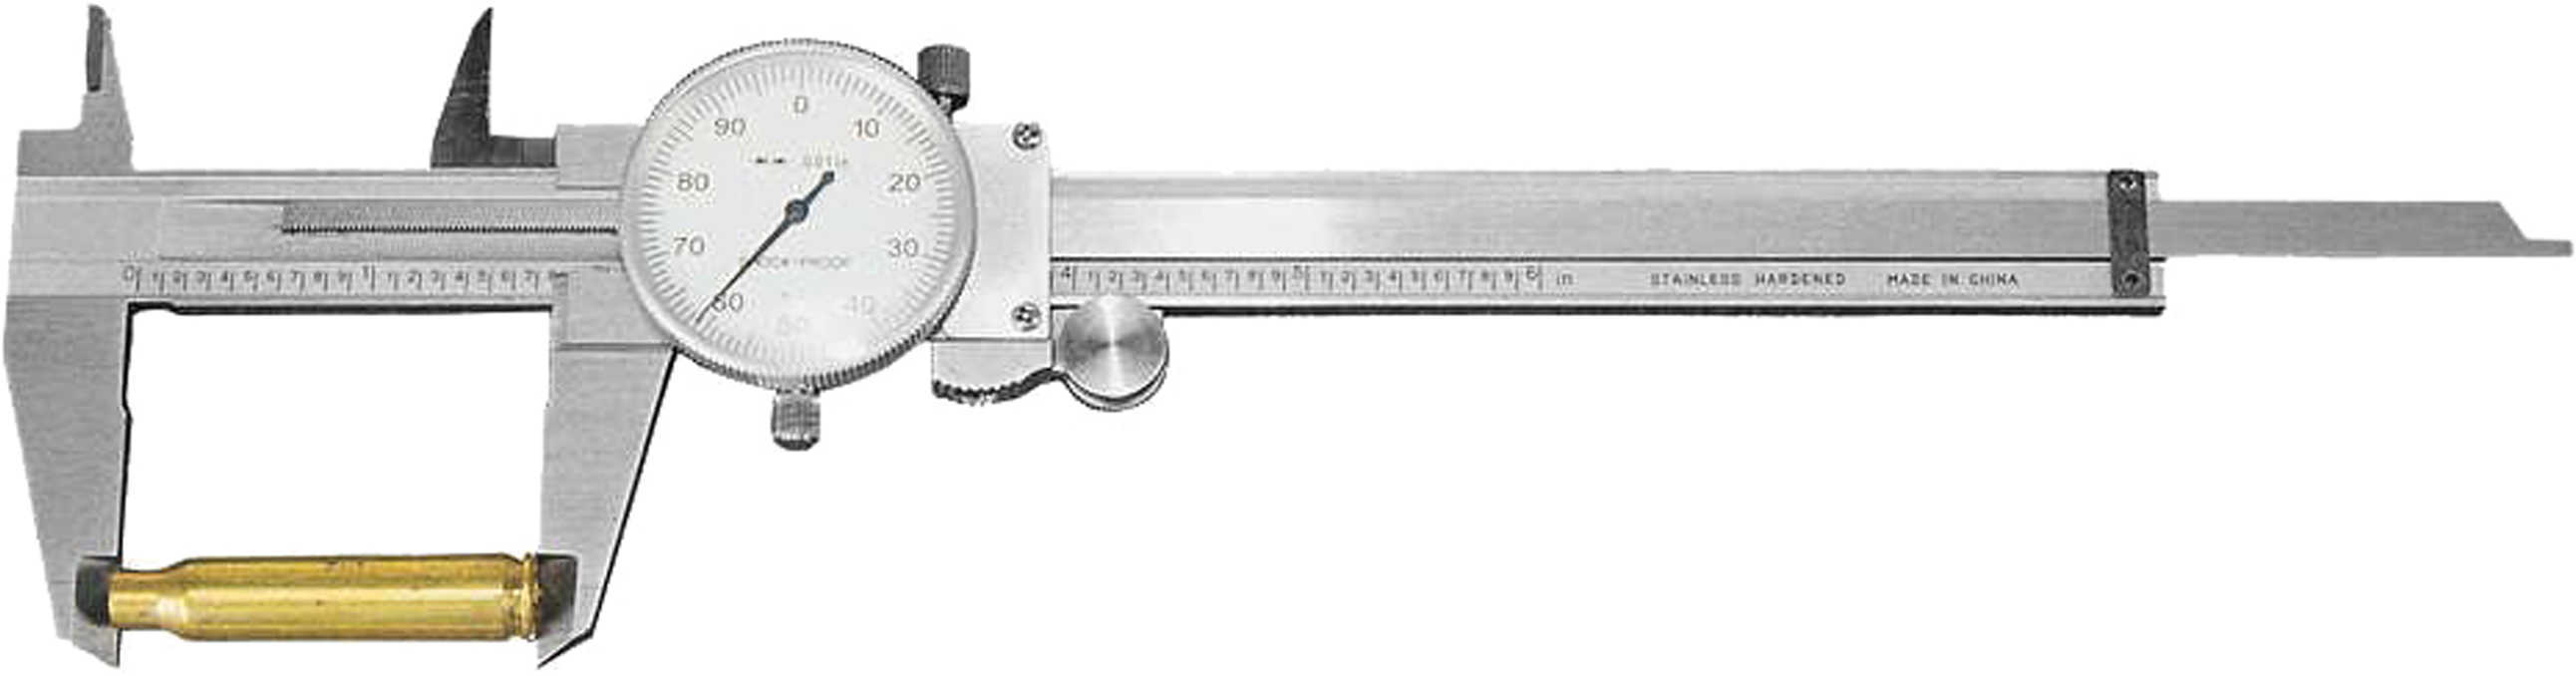 Frankford Arsenal Stainless Steel Dial Caliper 516503